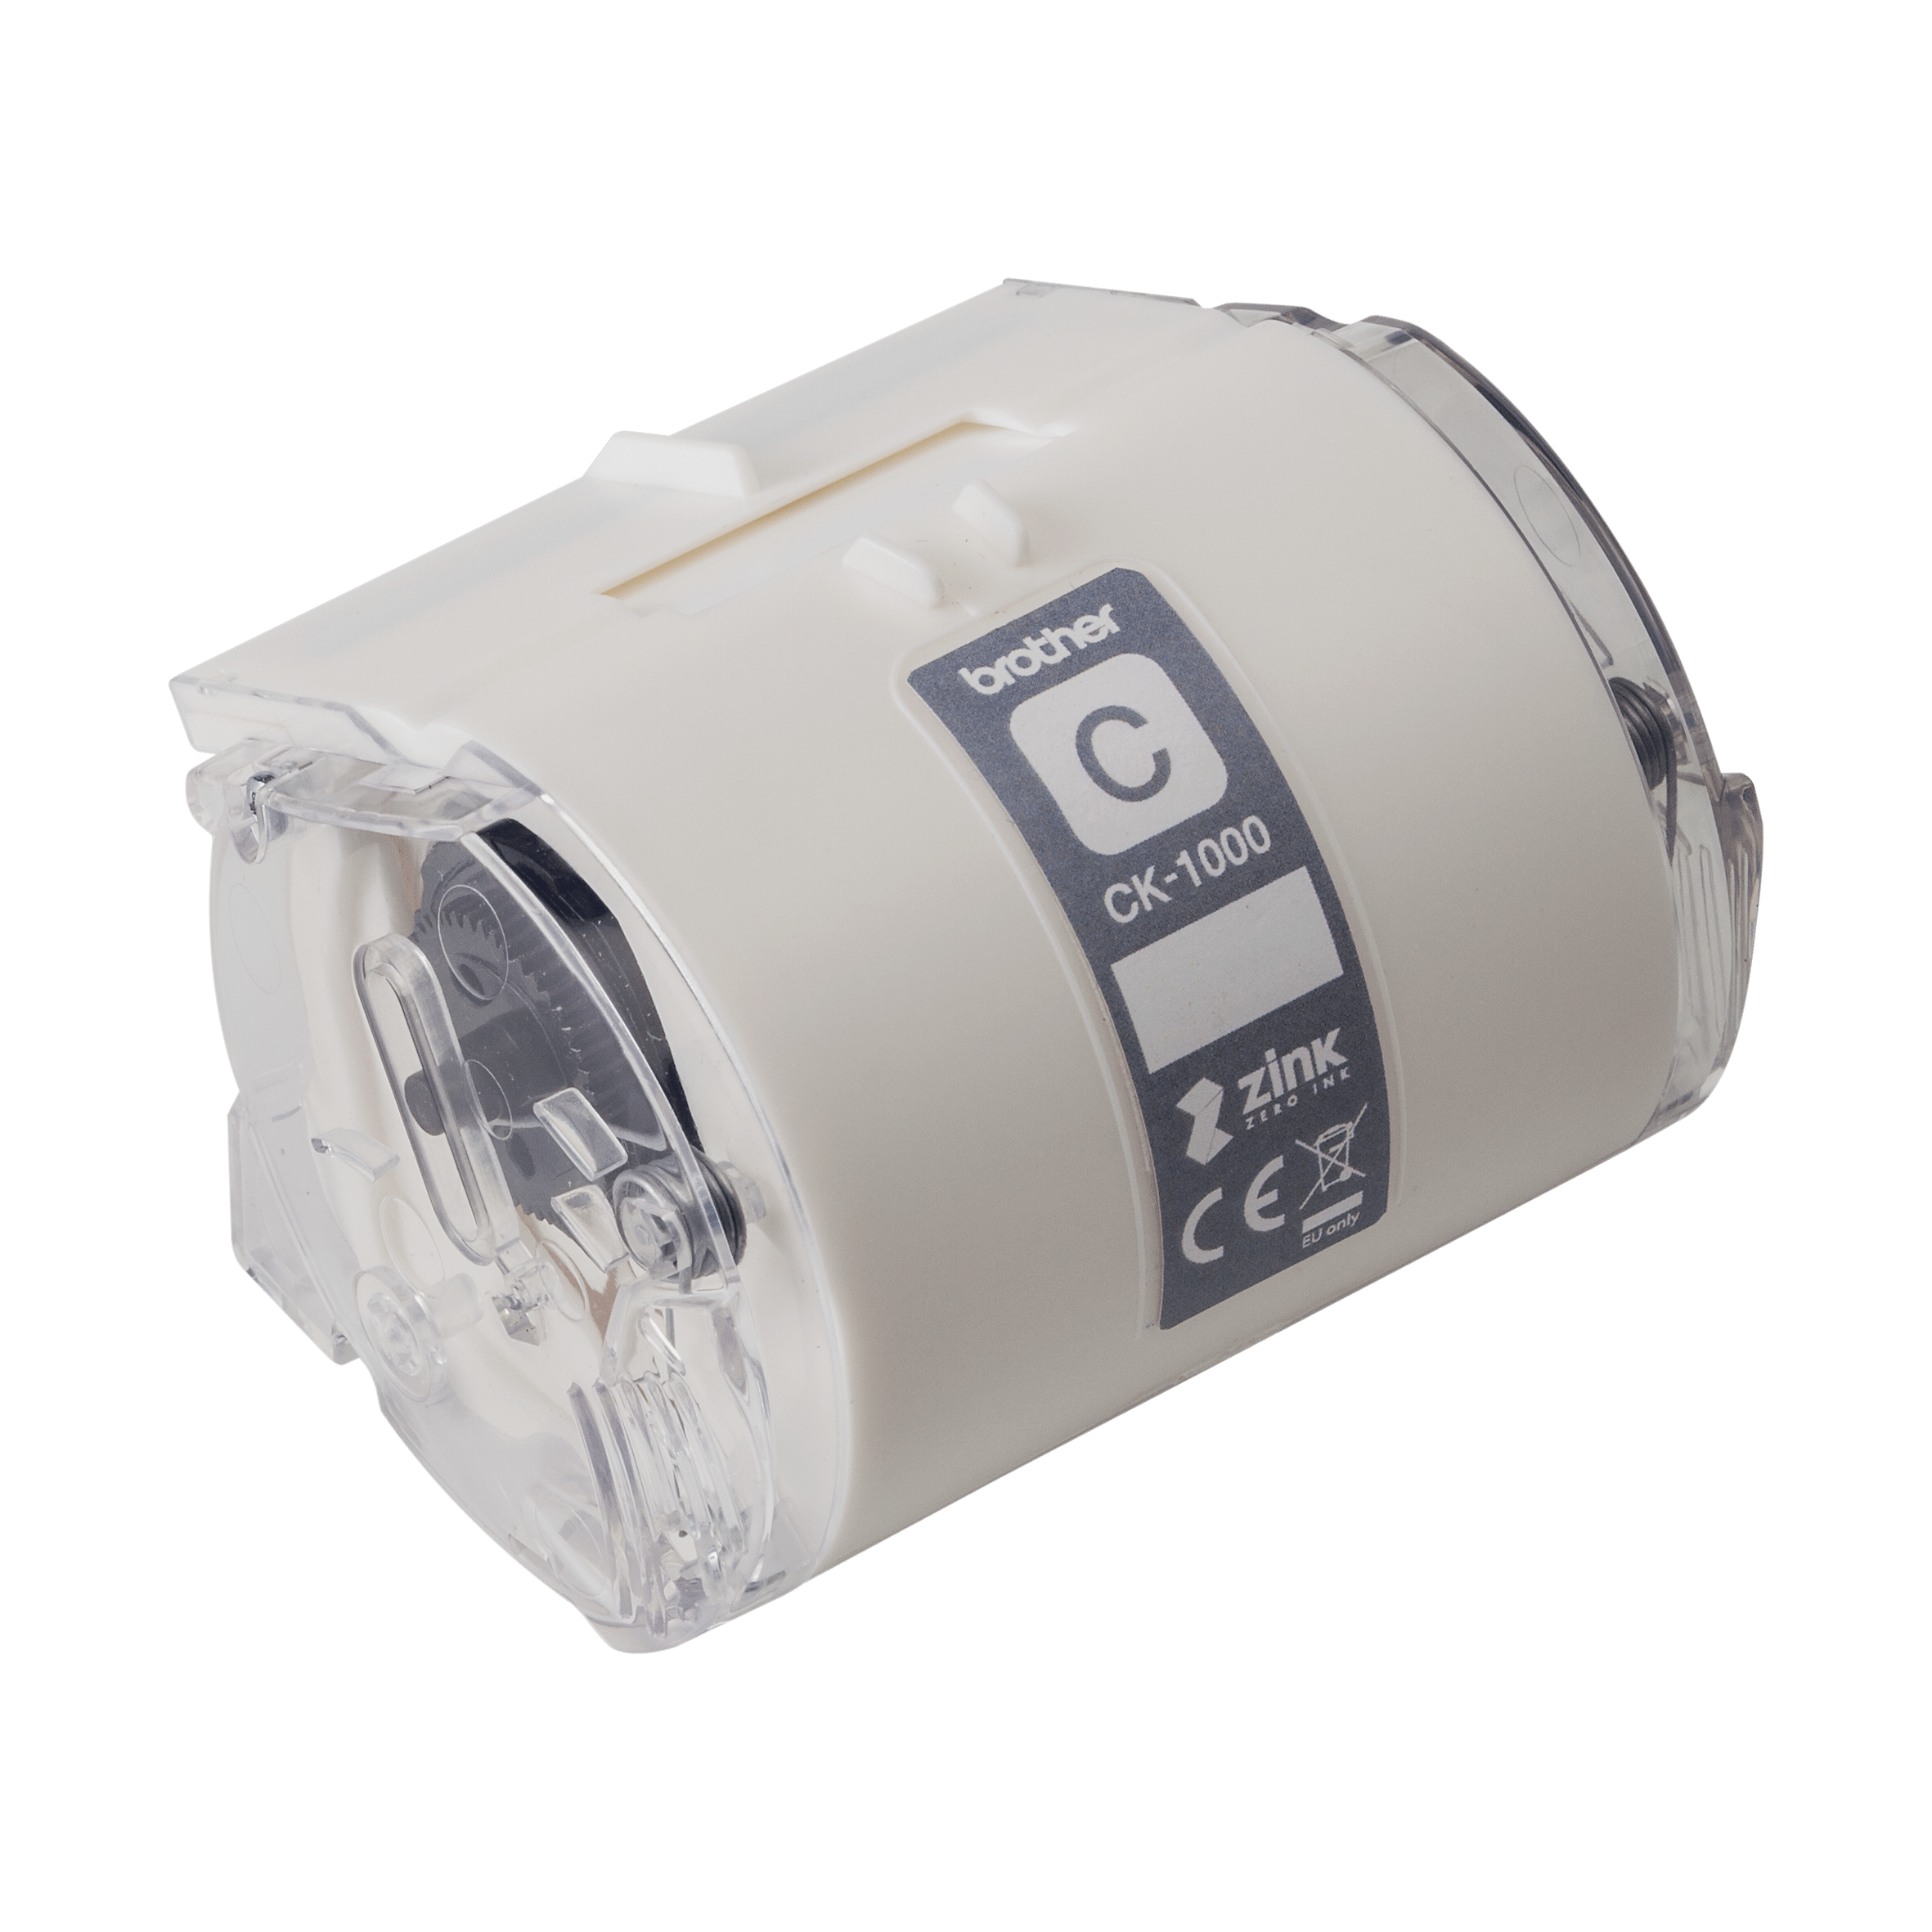 Genuine Brother CK-1000 print head cleaning roll, 50mm wide